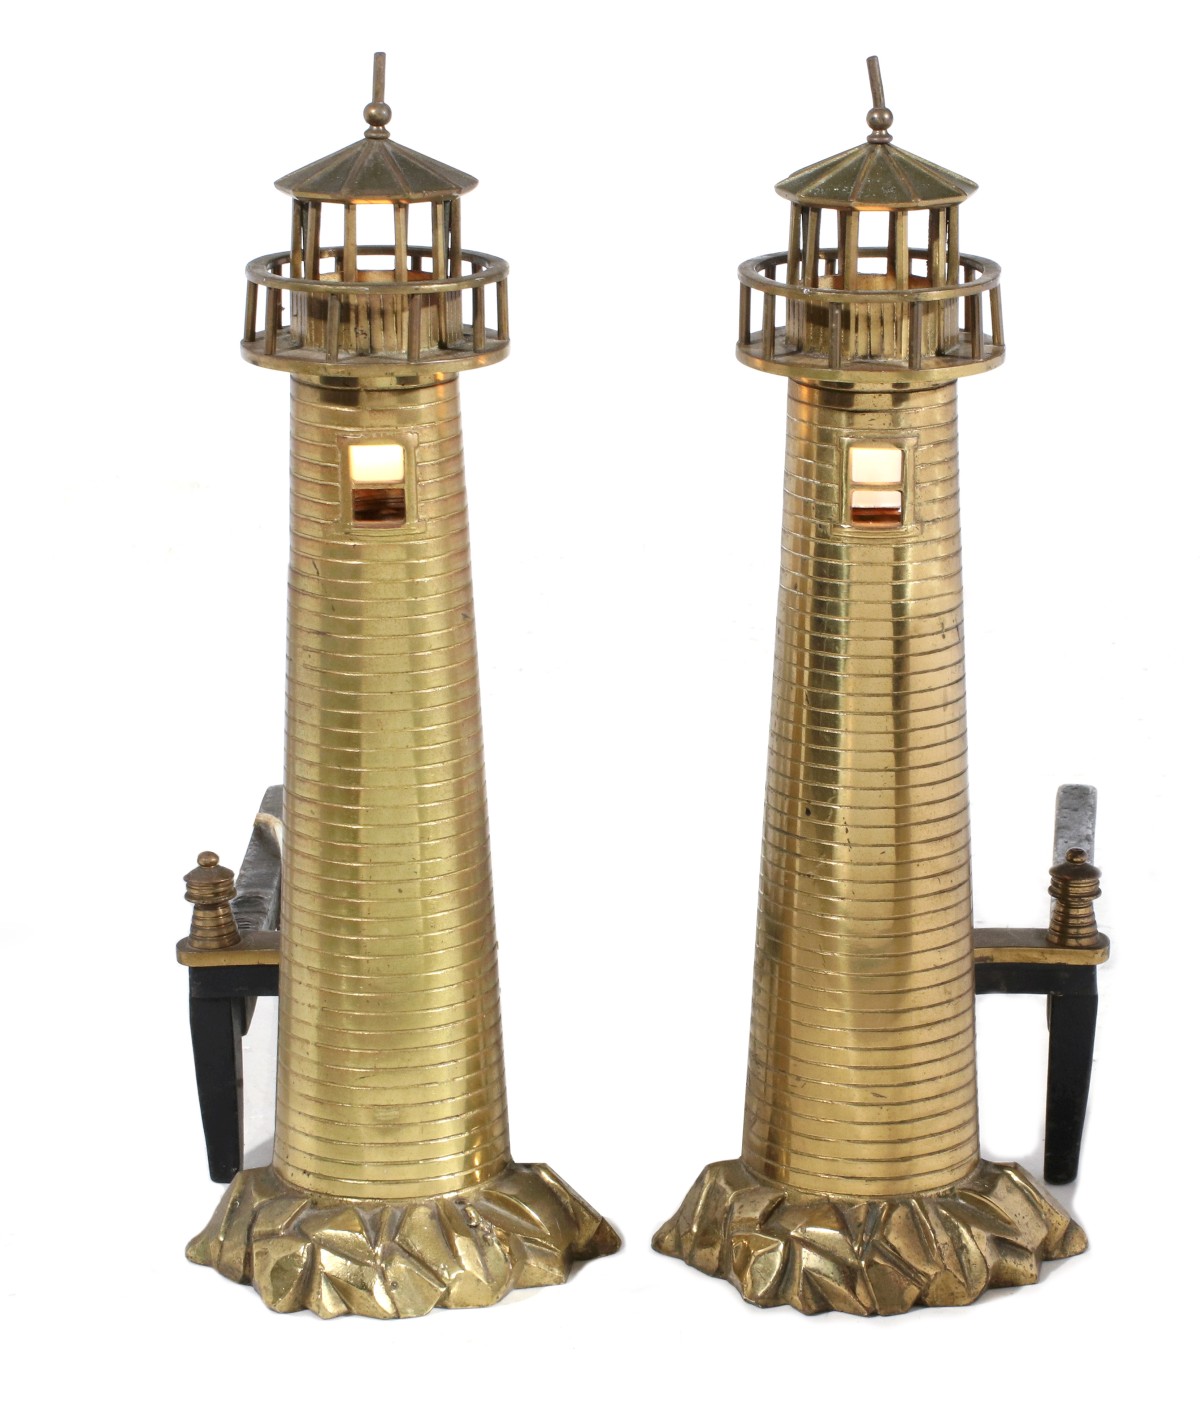 ROSTAND DETAILED CAST BRASS LIGHTHOUSE FORM ANDIRONS